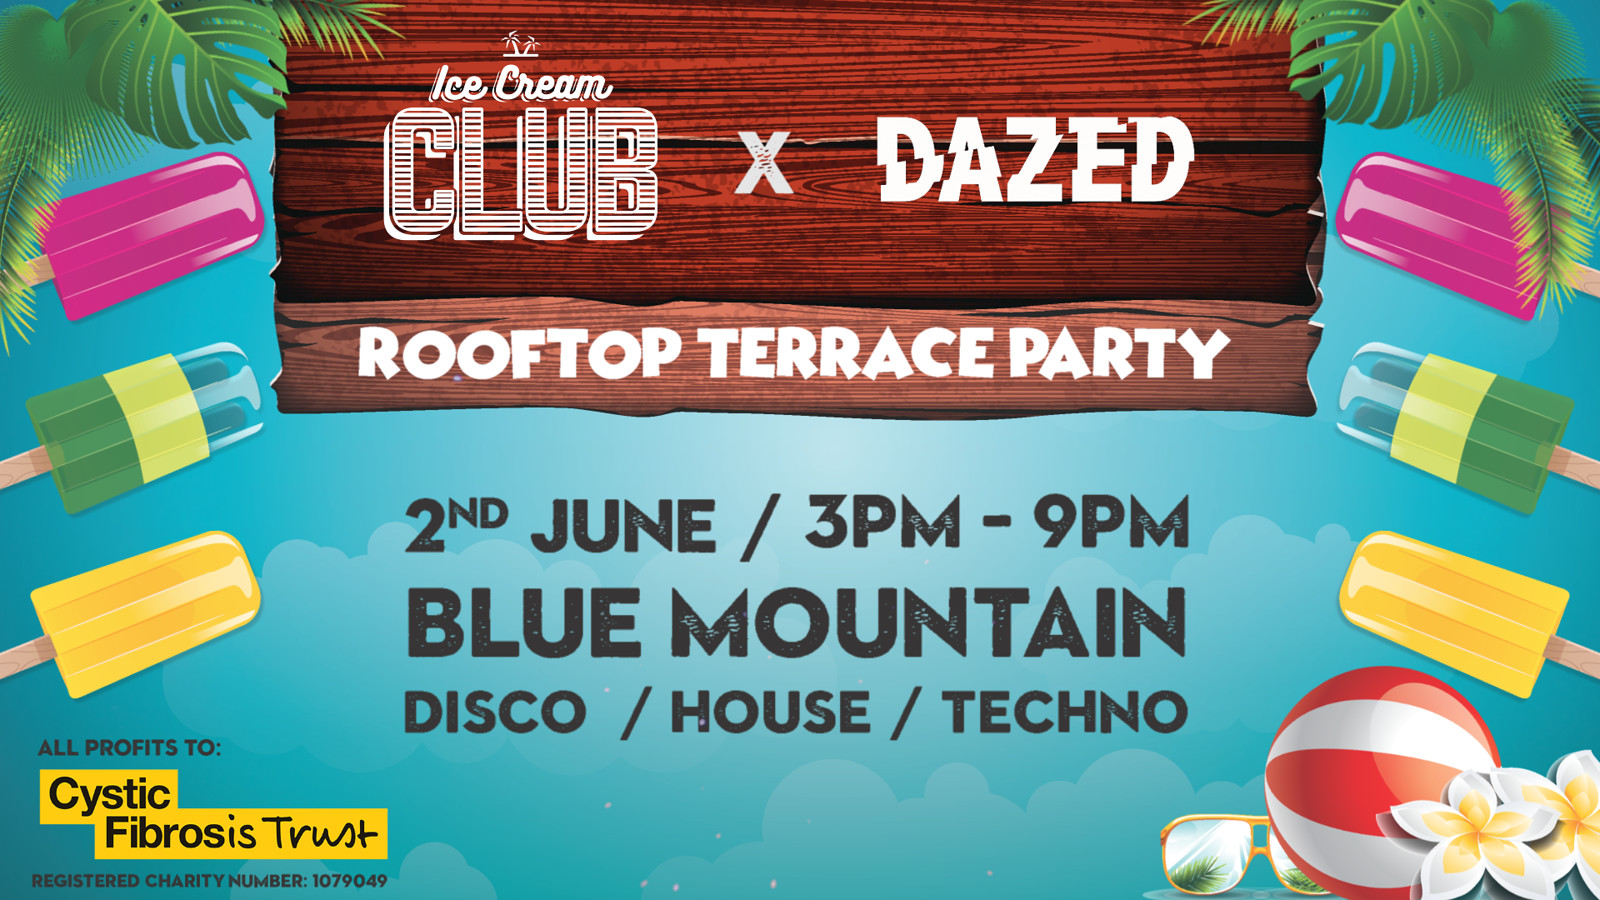 Ice Cream Club x Dazed: Rooftop Party at Blue Mountain